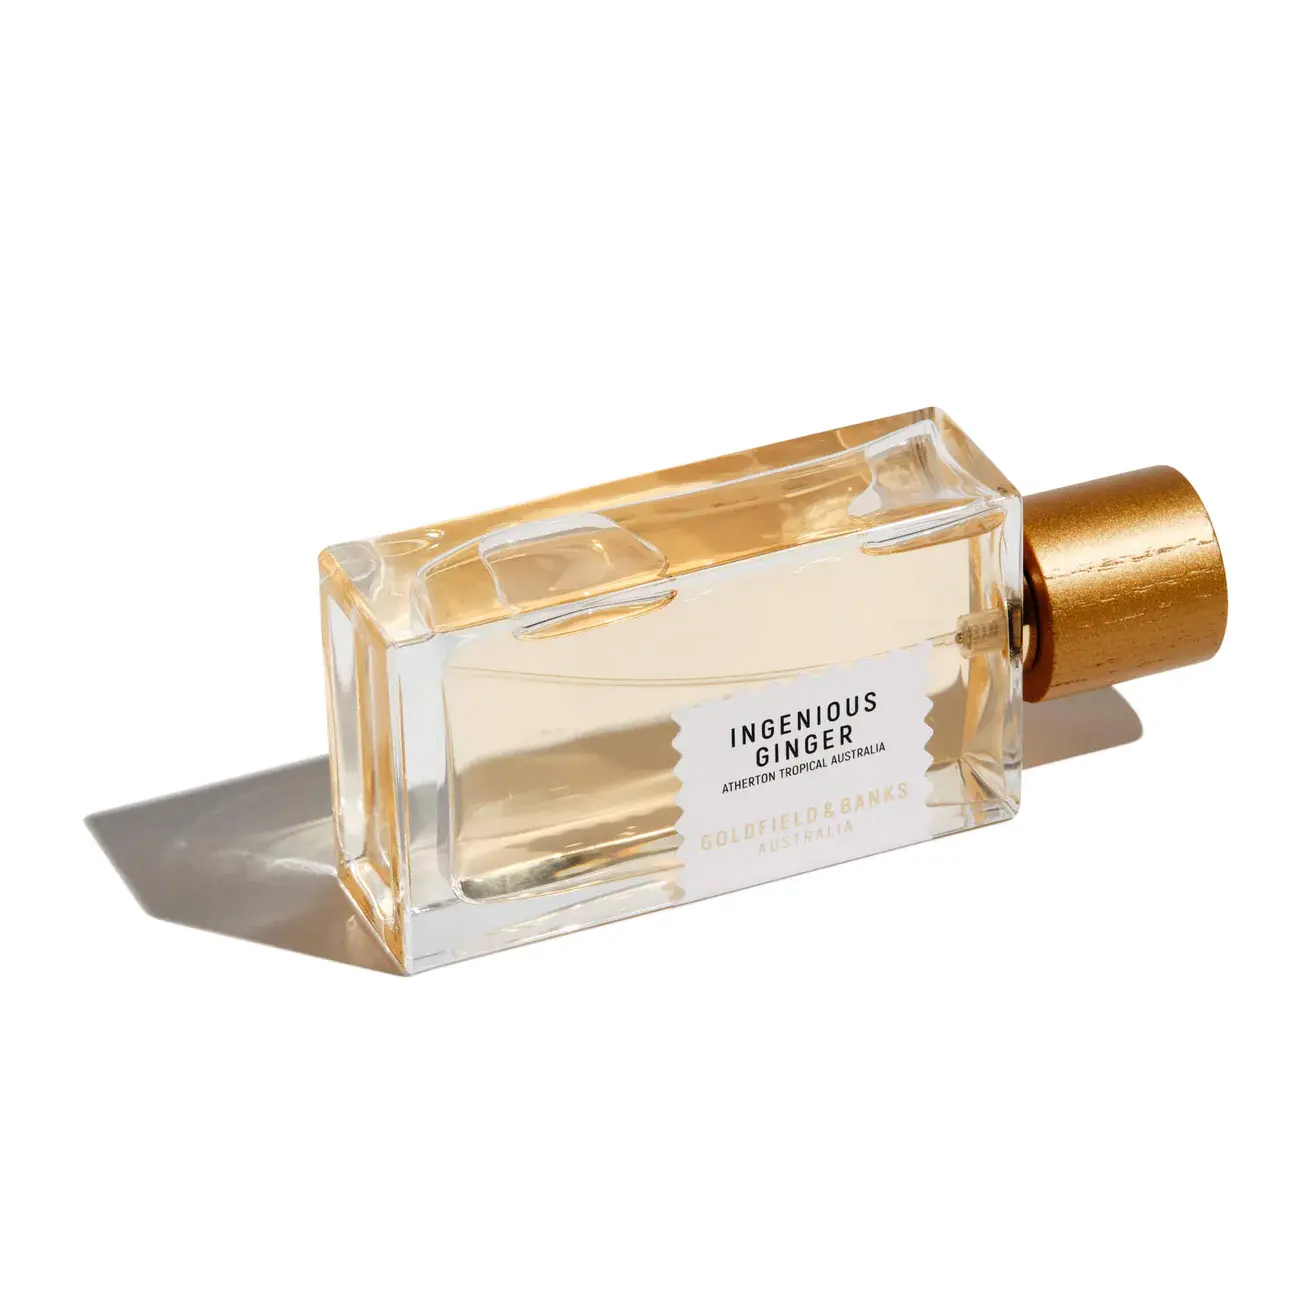 Ingenious Ginger Perfume by Goldfield and Banks - THE NATIVE SERIES - 100ml-3